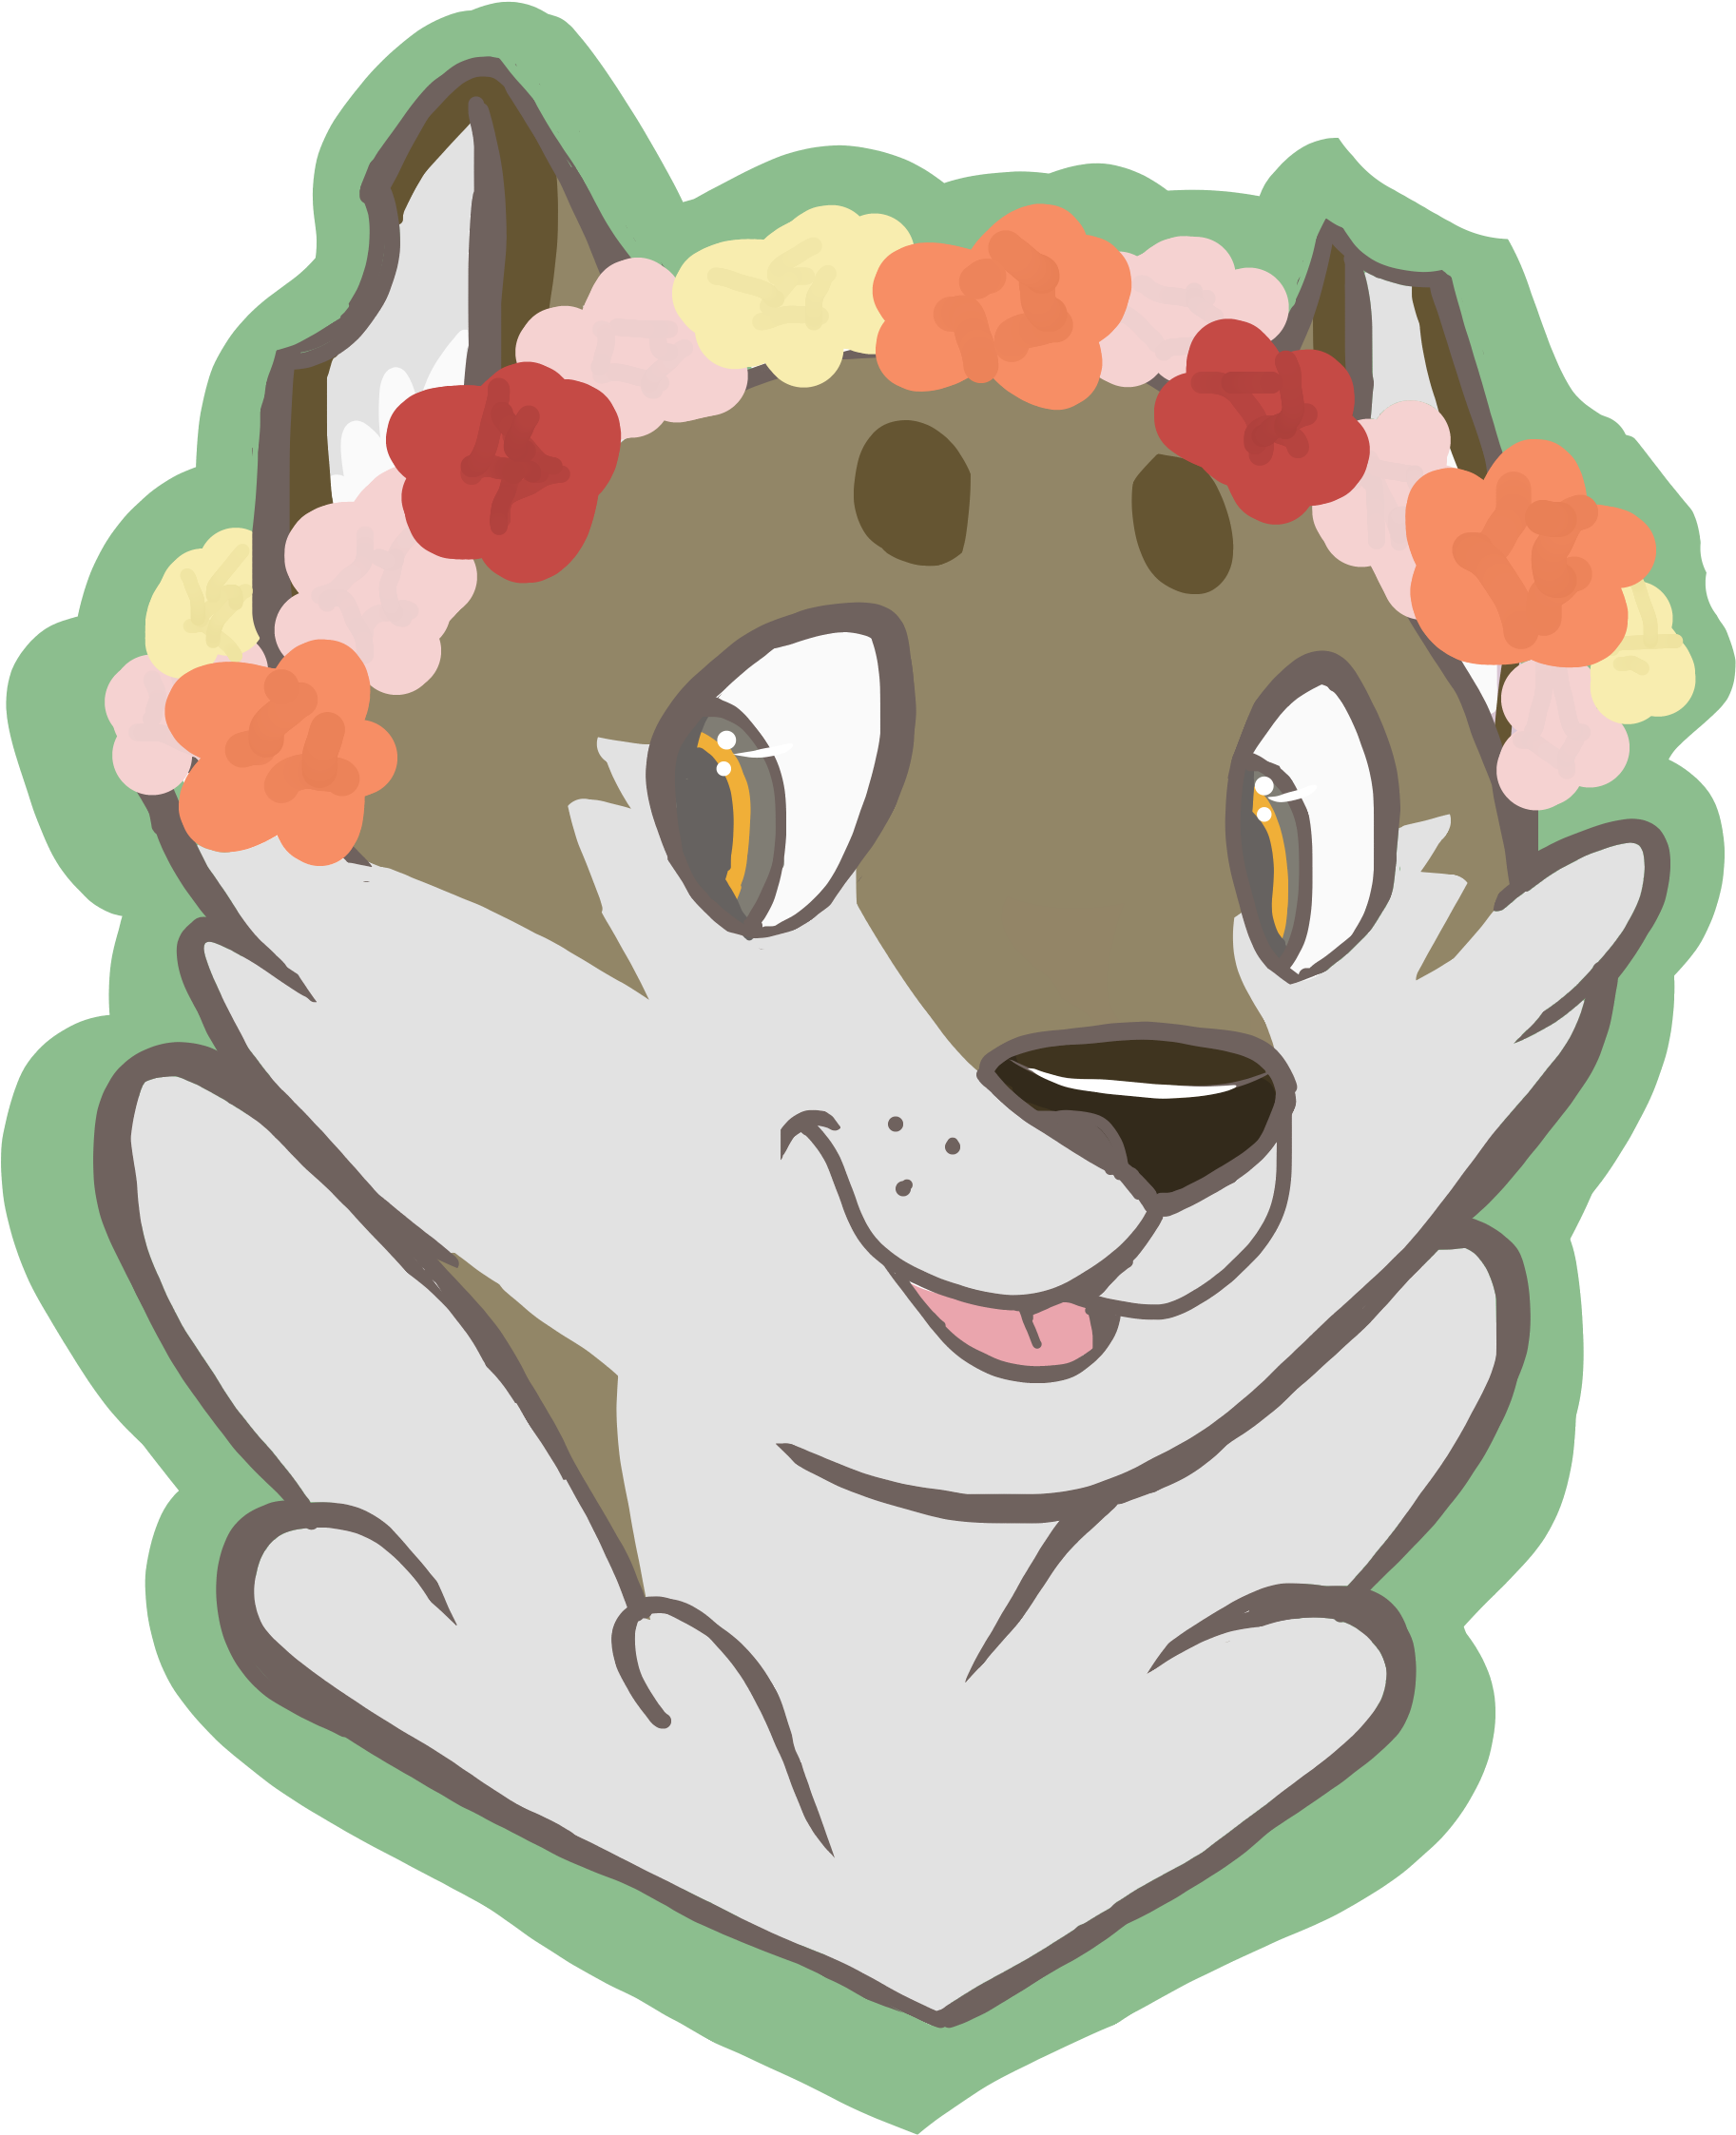 Peace Love & Flower Crowns - Furry With Flower Crown (2346x2827)